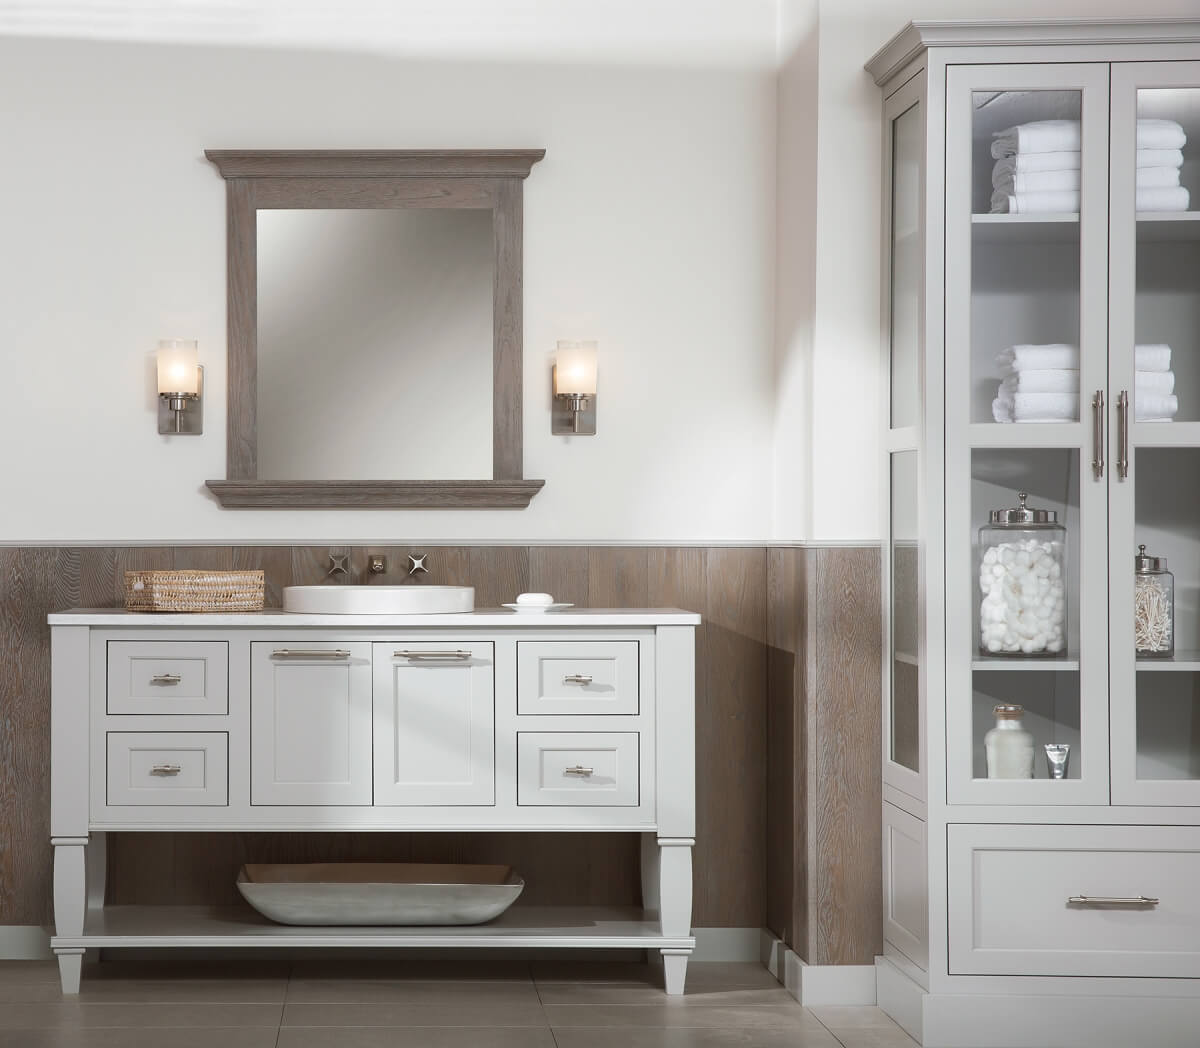 A lake shore inspired bathroom with a modern farmhouse styled bathroom vanity in a light gray cabinet paint color.